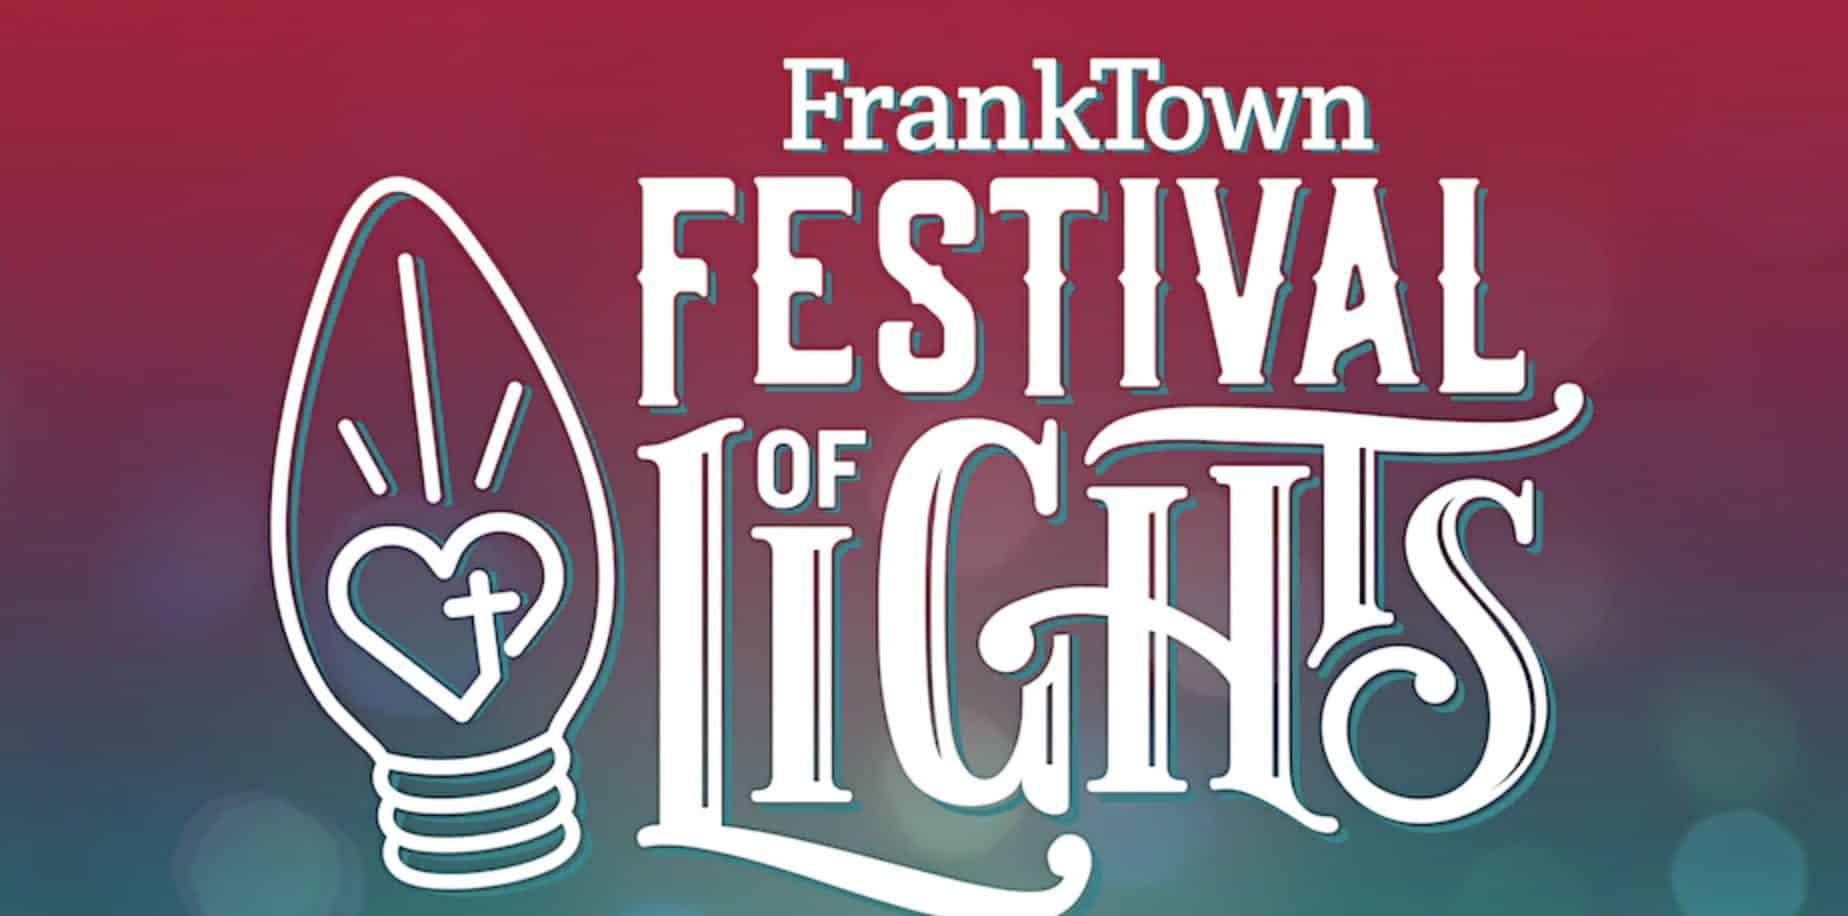 FrankTown Festival of Lights in Franklin, TN is a holiday event that offers family fun with the longest drive-thru holiday lights spectacular in Williamson County, Tennessee.